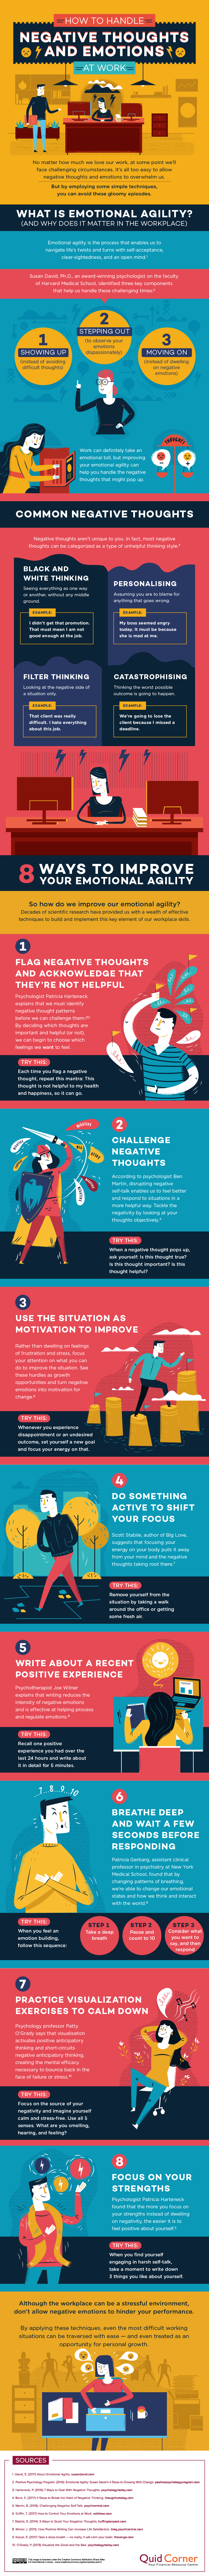 How-to-Handle-Negative-Thoughts-and-Emotions-at-Work